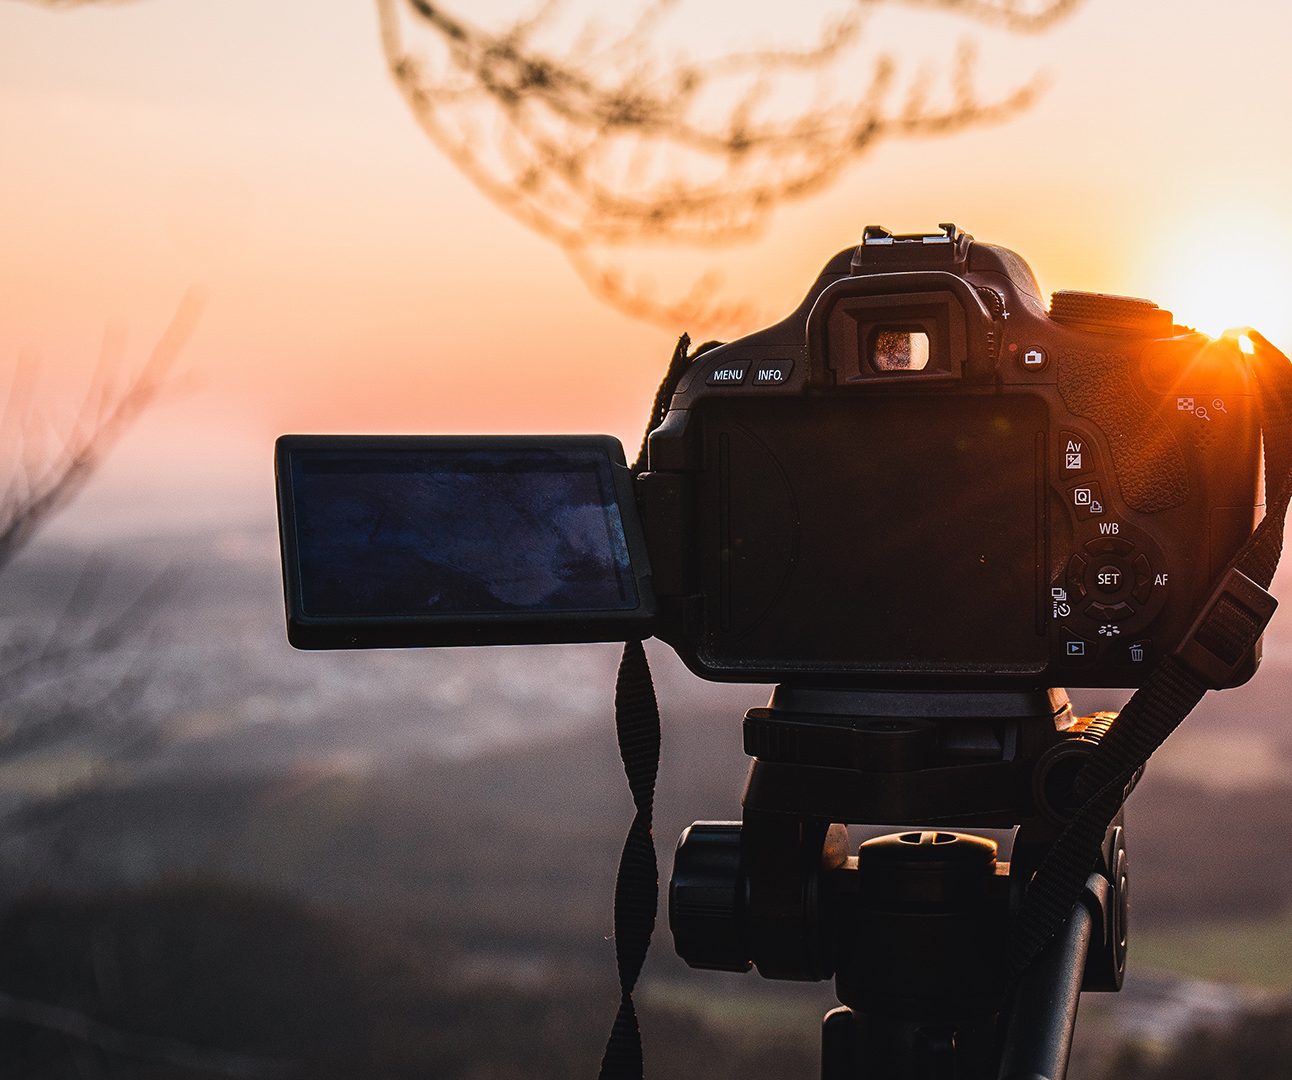 A camera pointing at a sunset landscape